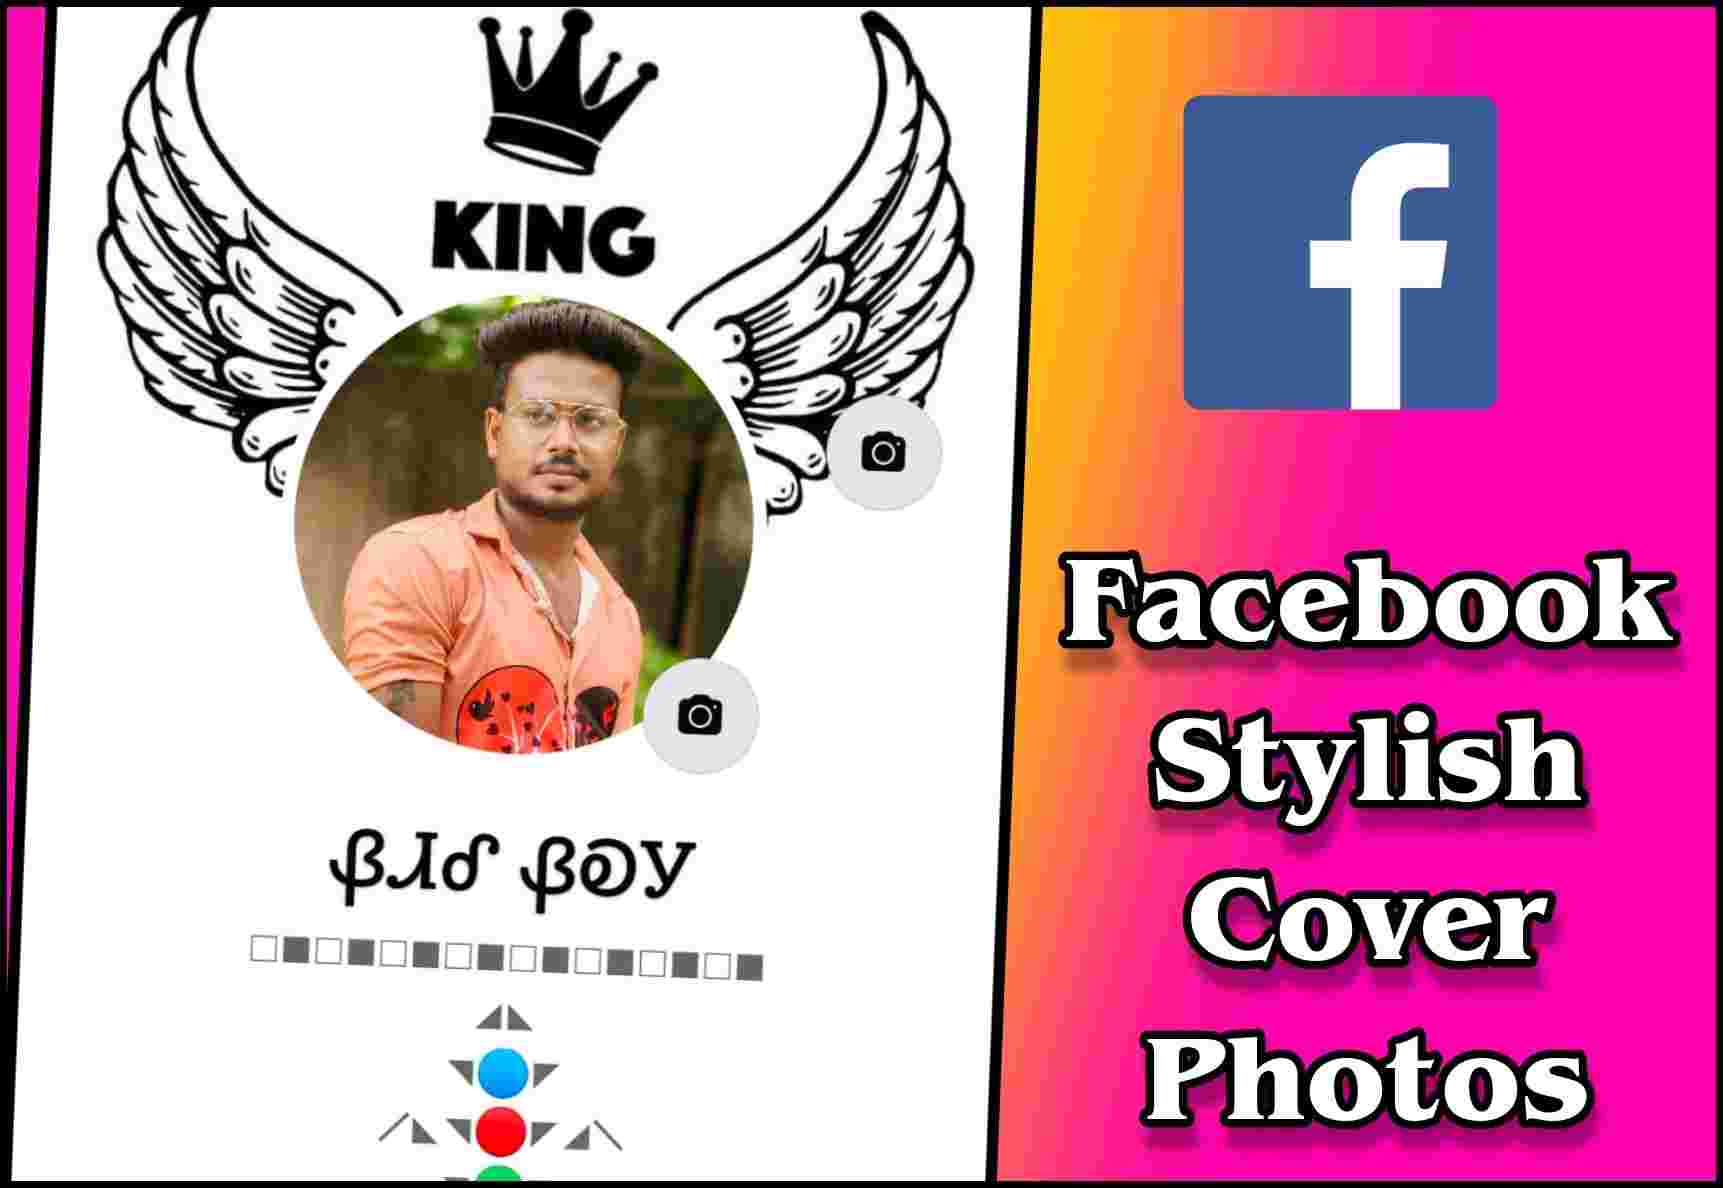 Facebook Stylish Cover Photos | Fb Stylish Cover Photos Download For Vip Account